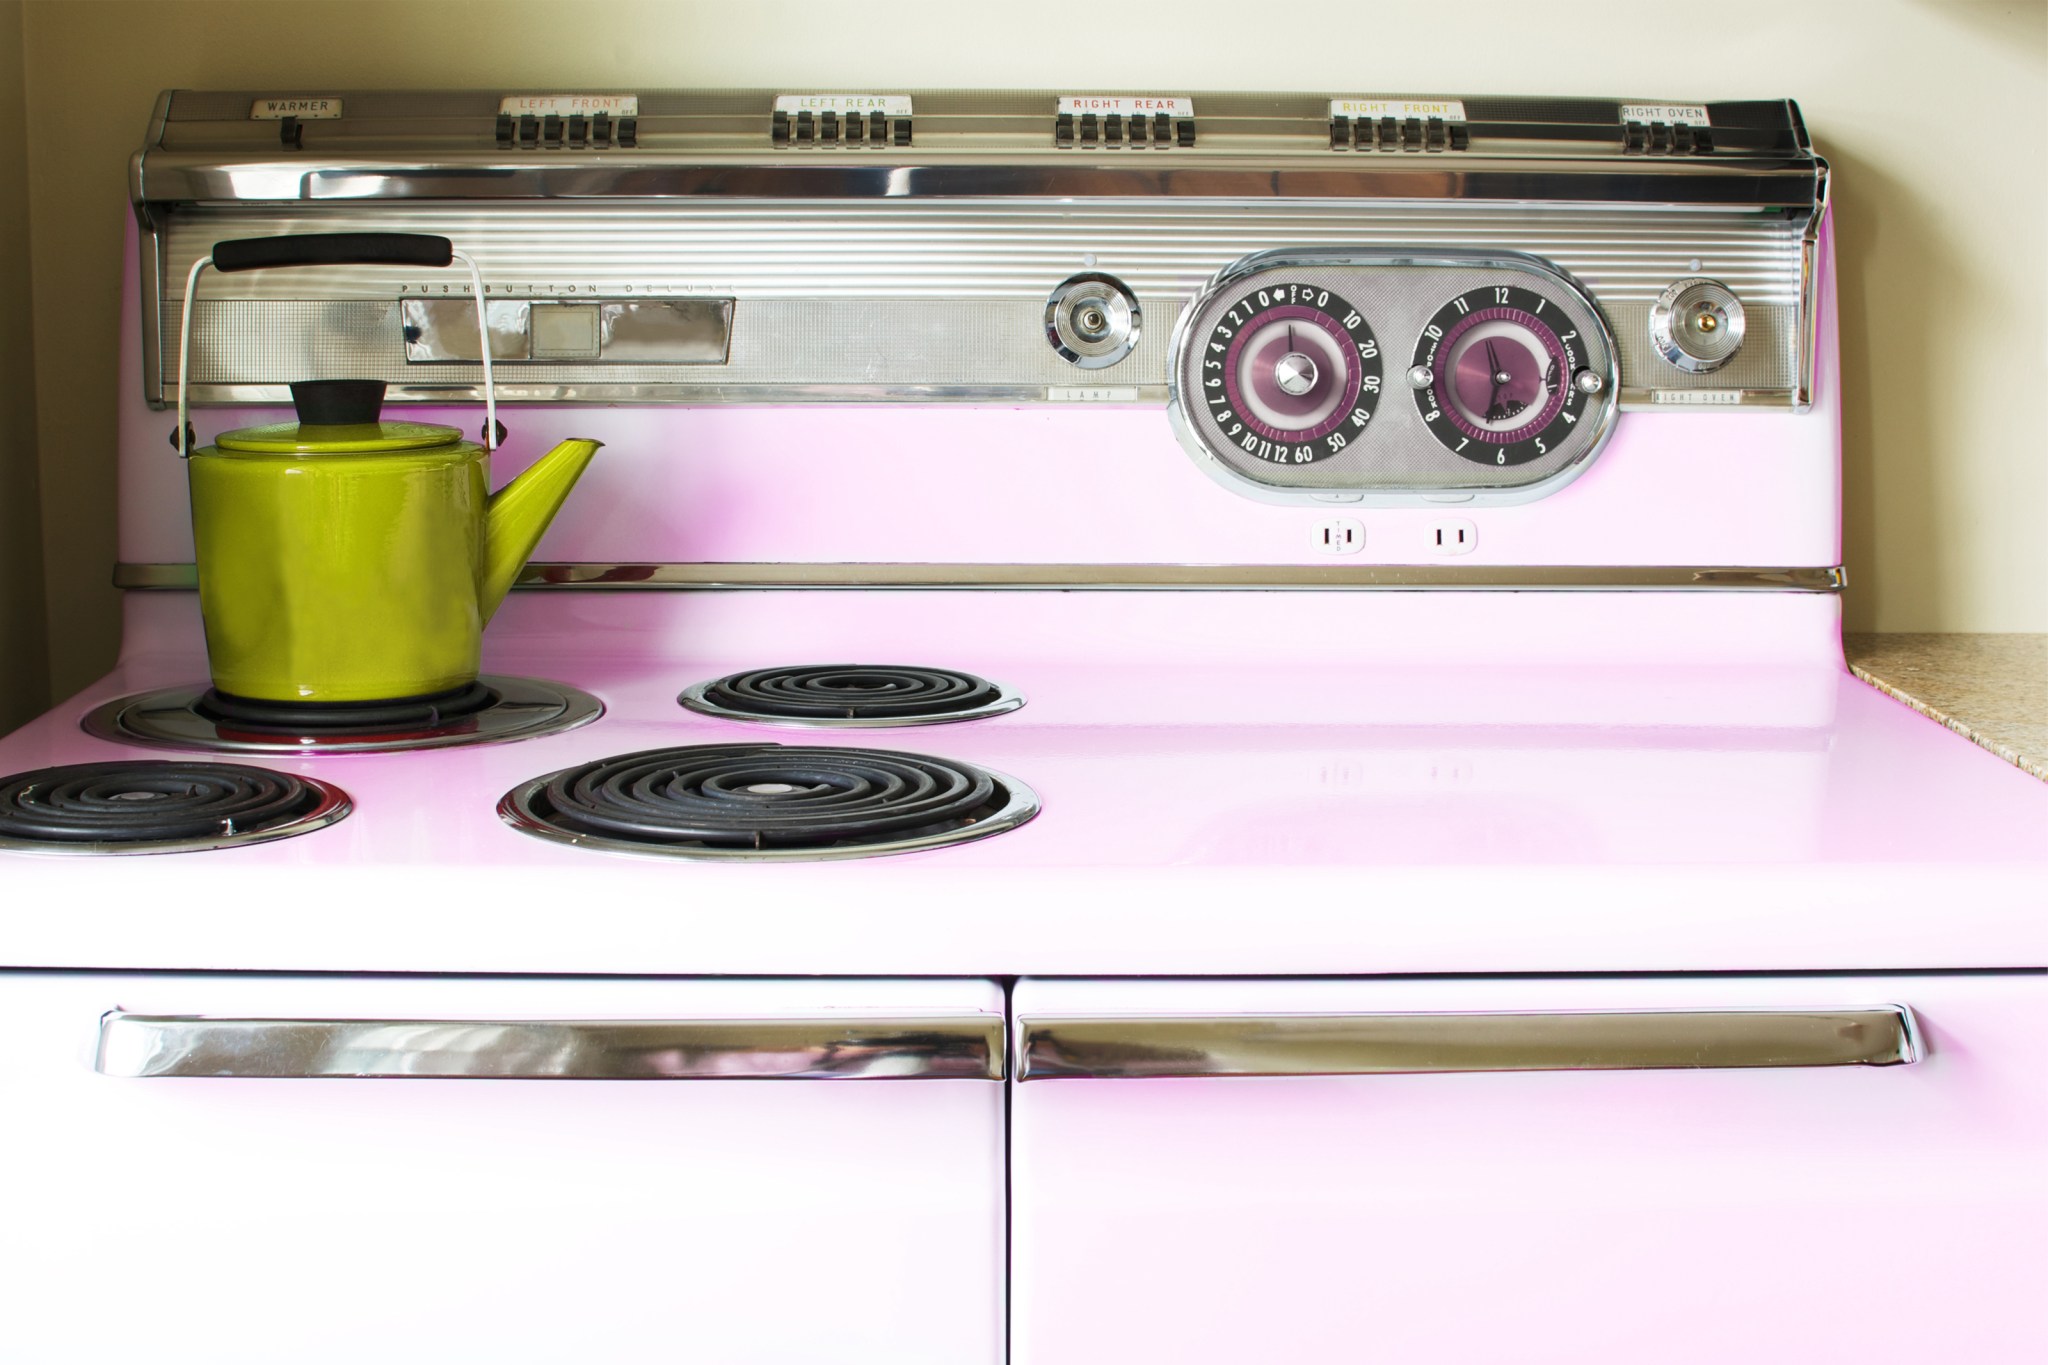 Vintage pink appliance in a home kitchen